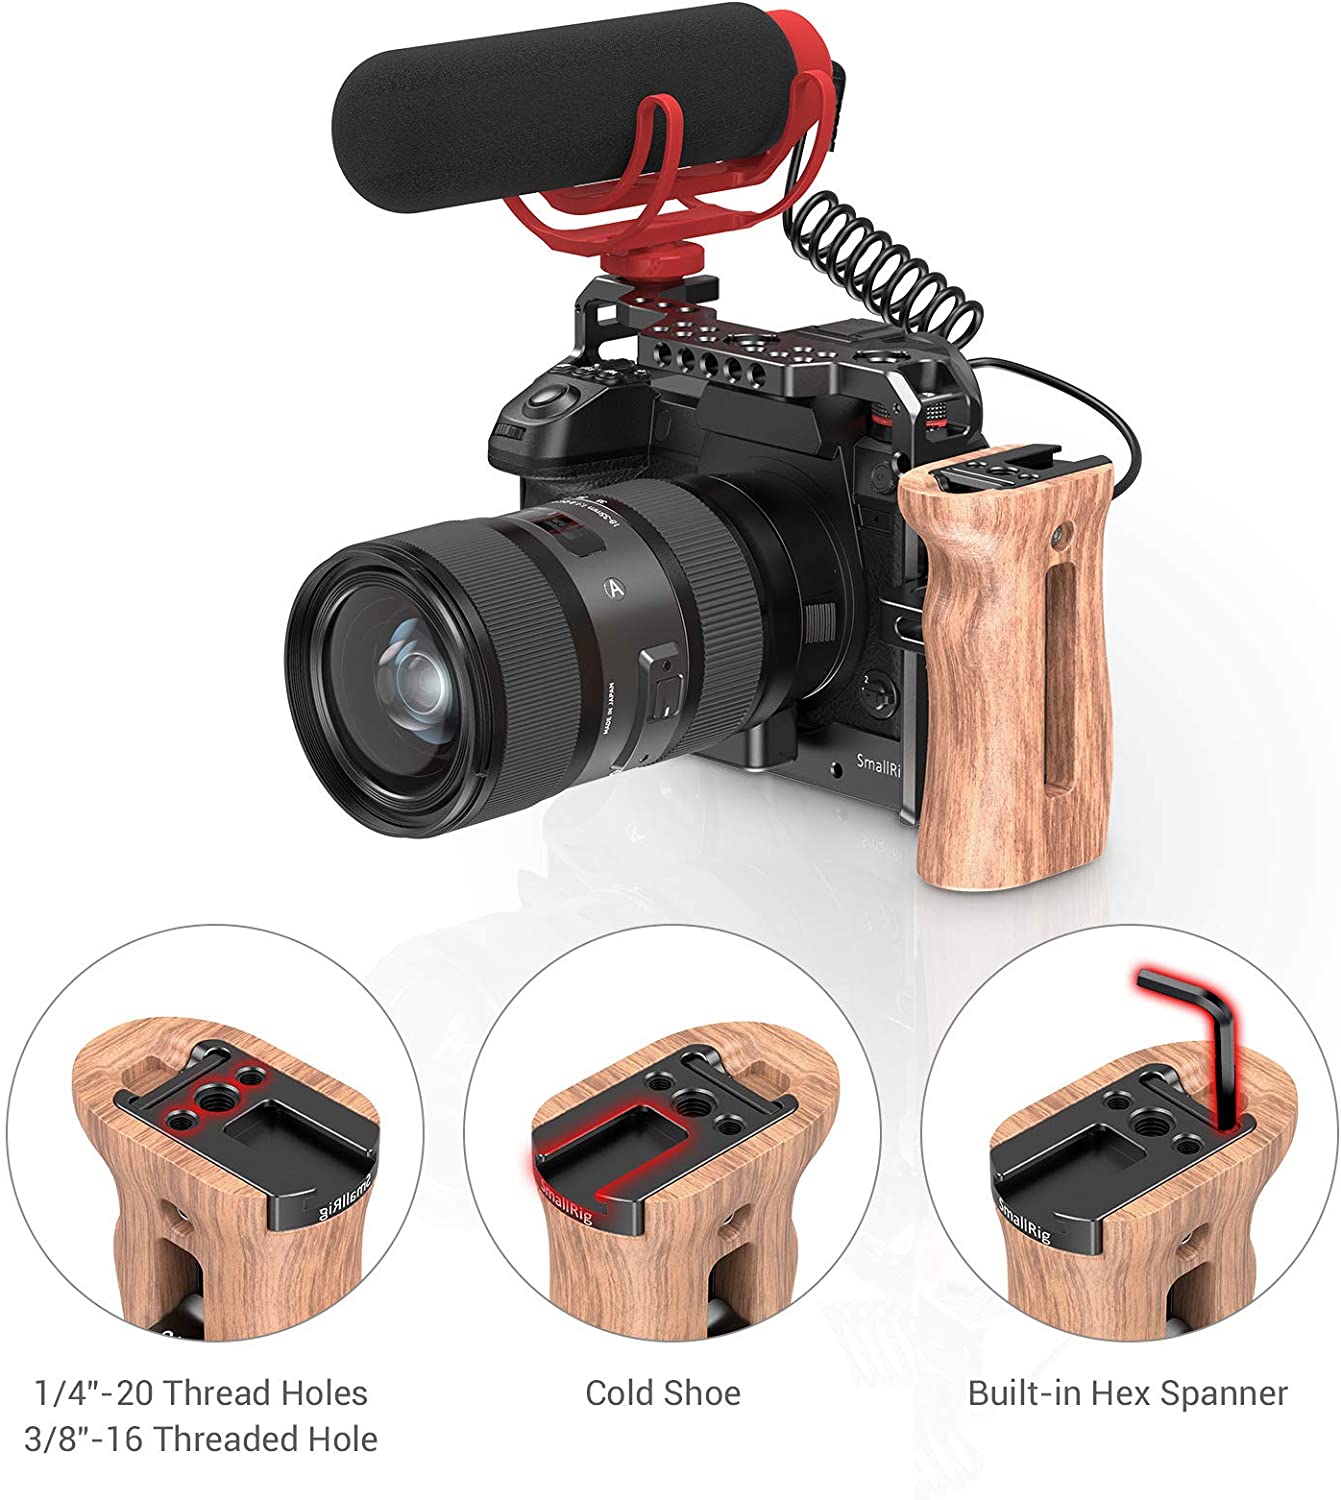 SMALLRIG Universal Side Wooden Handle Grip for DSLR Camera Cage w/Cold Shoe Mount, Threaded Holes - 2093B